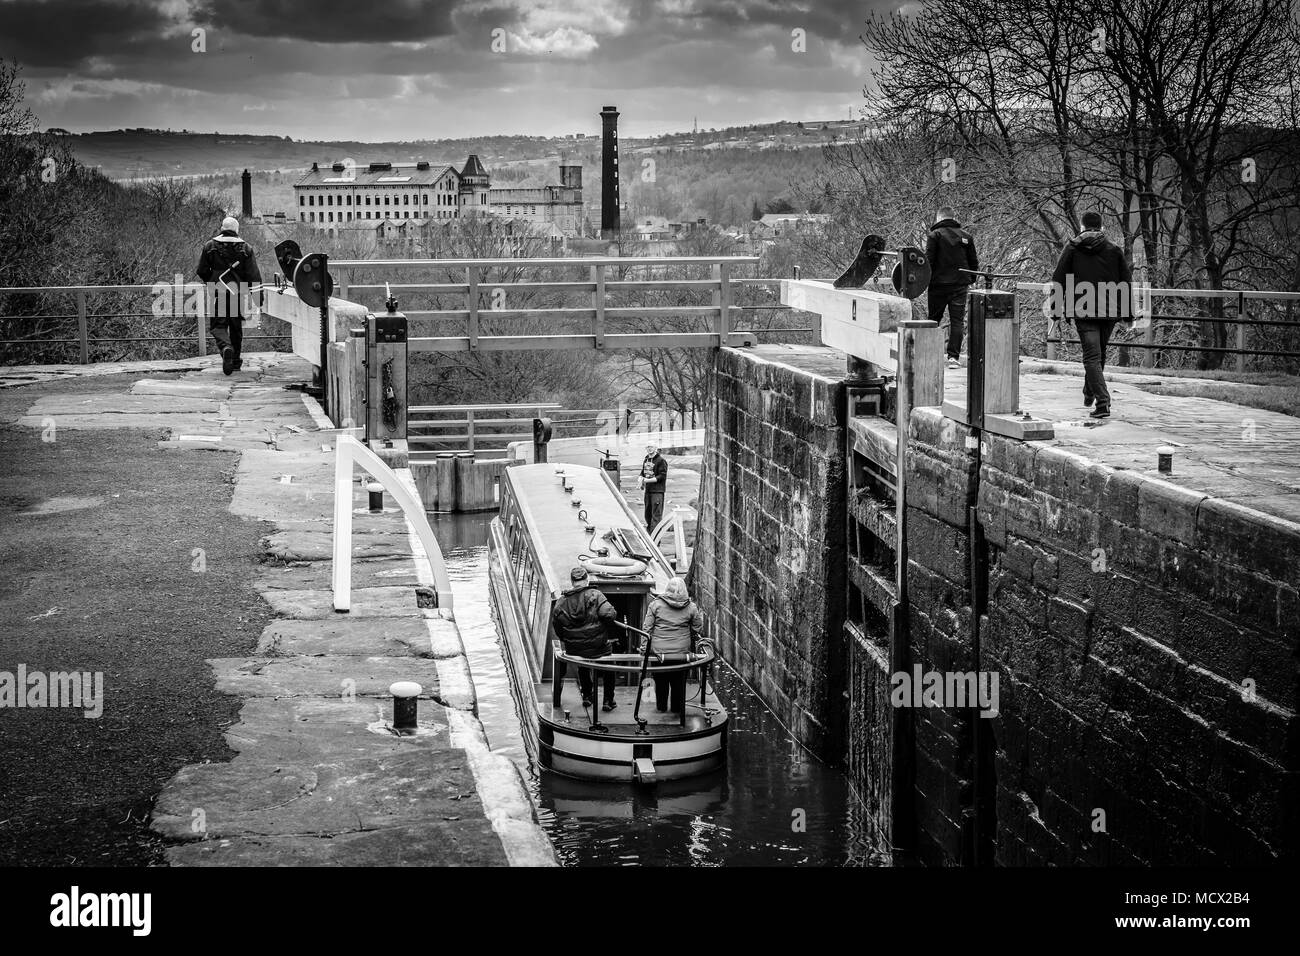 A boat being lowered down The Five Rise Locks on the Leeds and Liverpool Canal, Bingley, near Bradford, West Yorkshire, England. Stock Photo